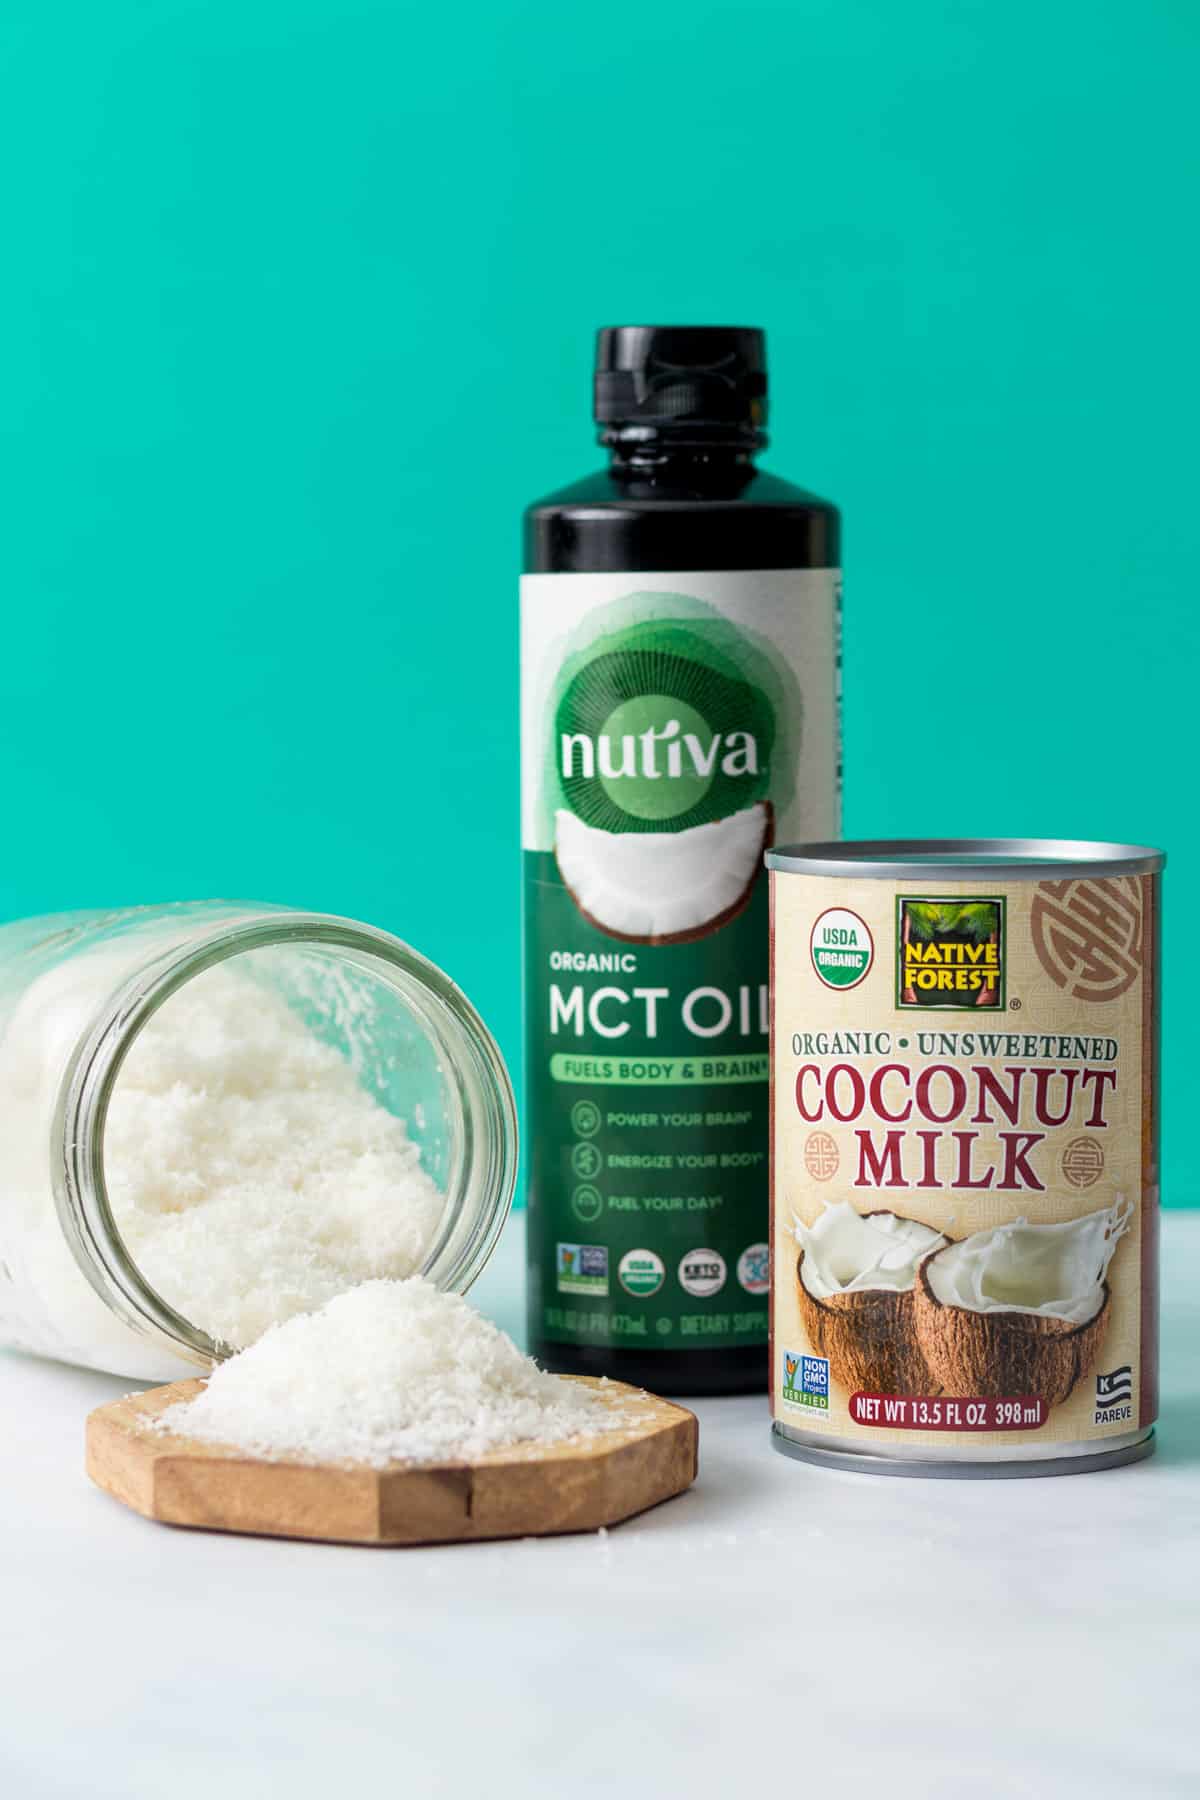 Coconut milk, MCT oil, and coconut shreds.